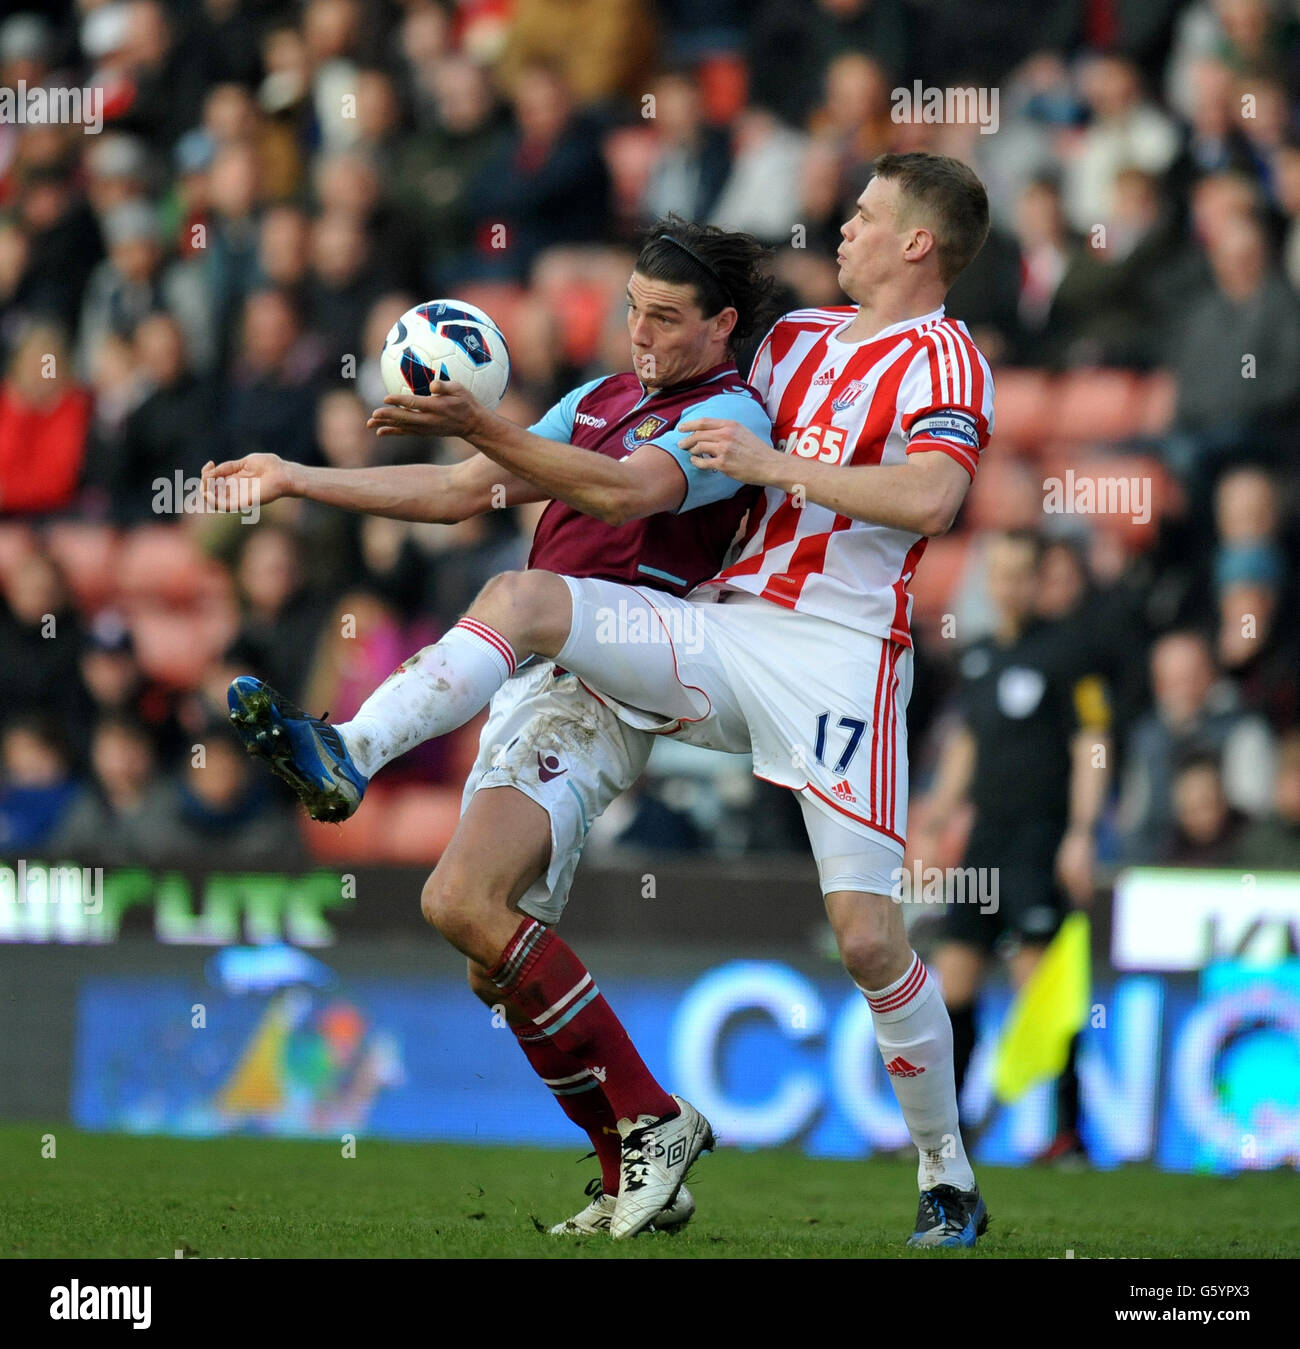 Stoke City's Ryan Shawcross challenges West Ham United's Andy Carroll during the Barclays Premier League match at the Britannia Stadium, Stoke. Stock Photo